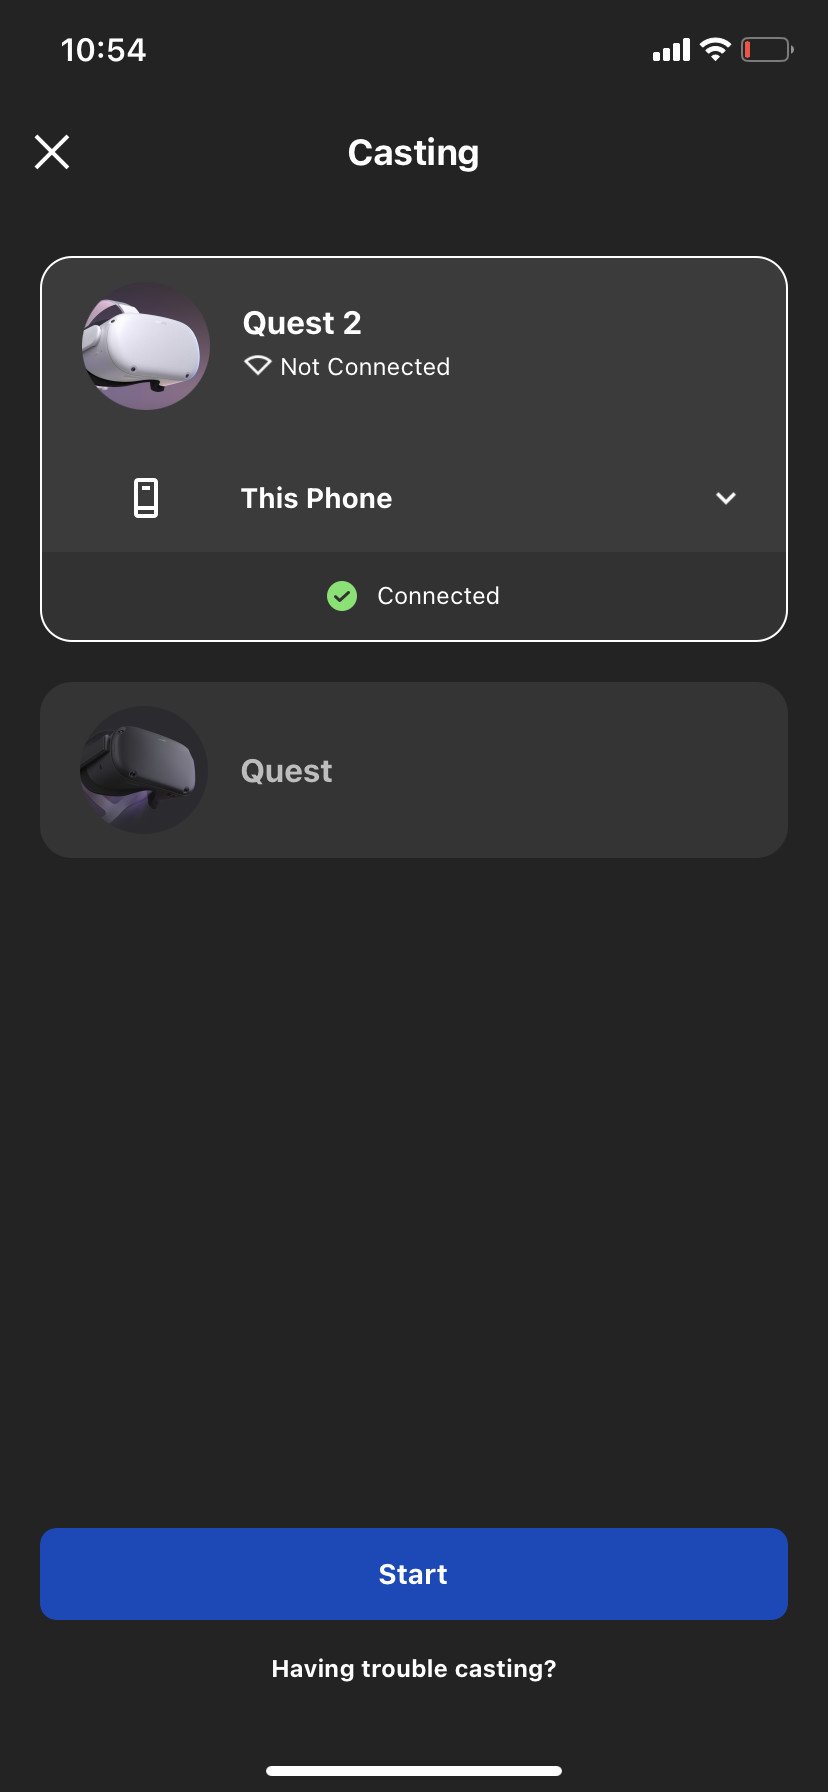 Oculus app menu with option to cast Oculus Quest 2 headset footage